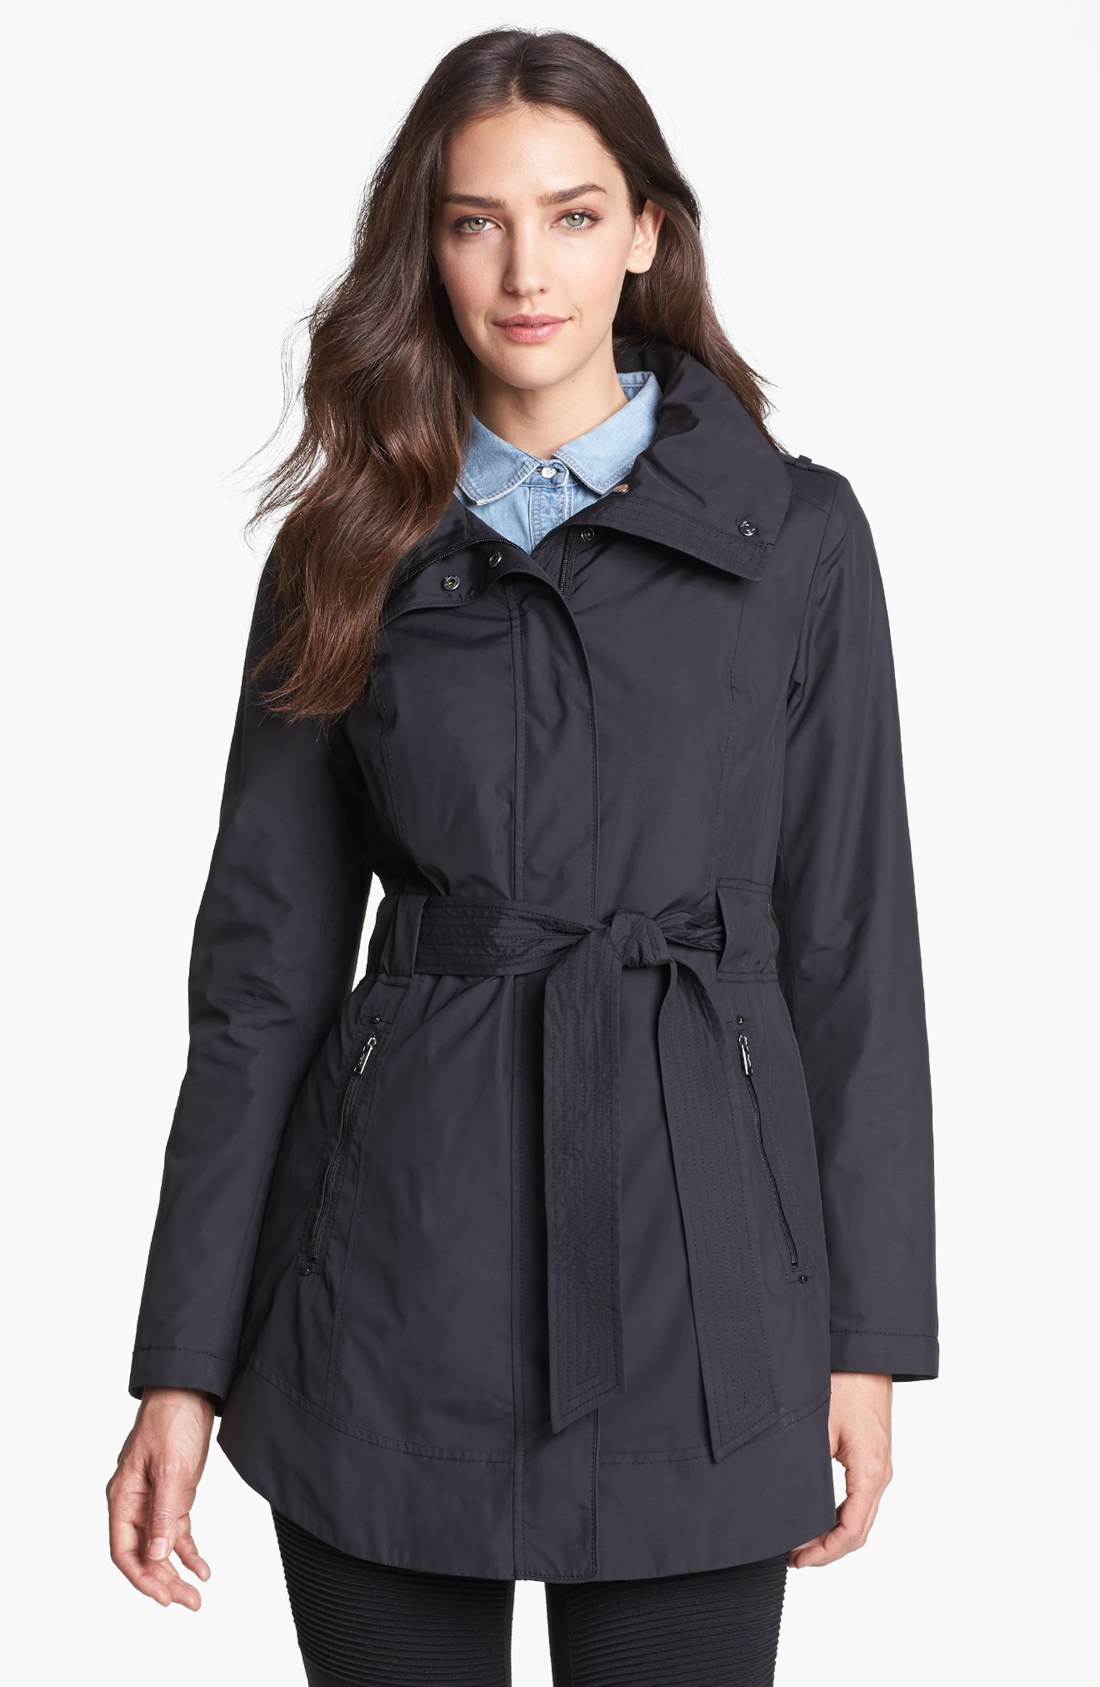 Tumi Cardiff Packable Raincoat with Detachable Liner in Black | Lyst